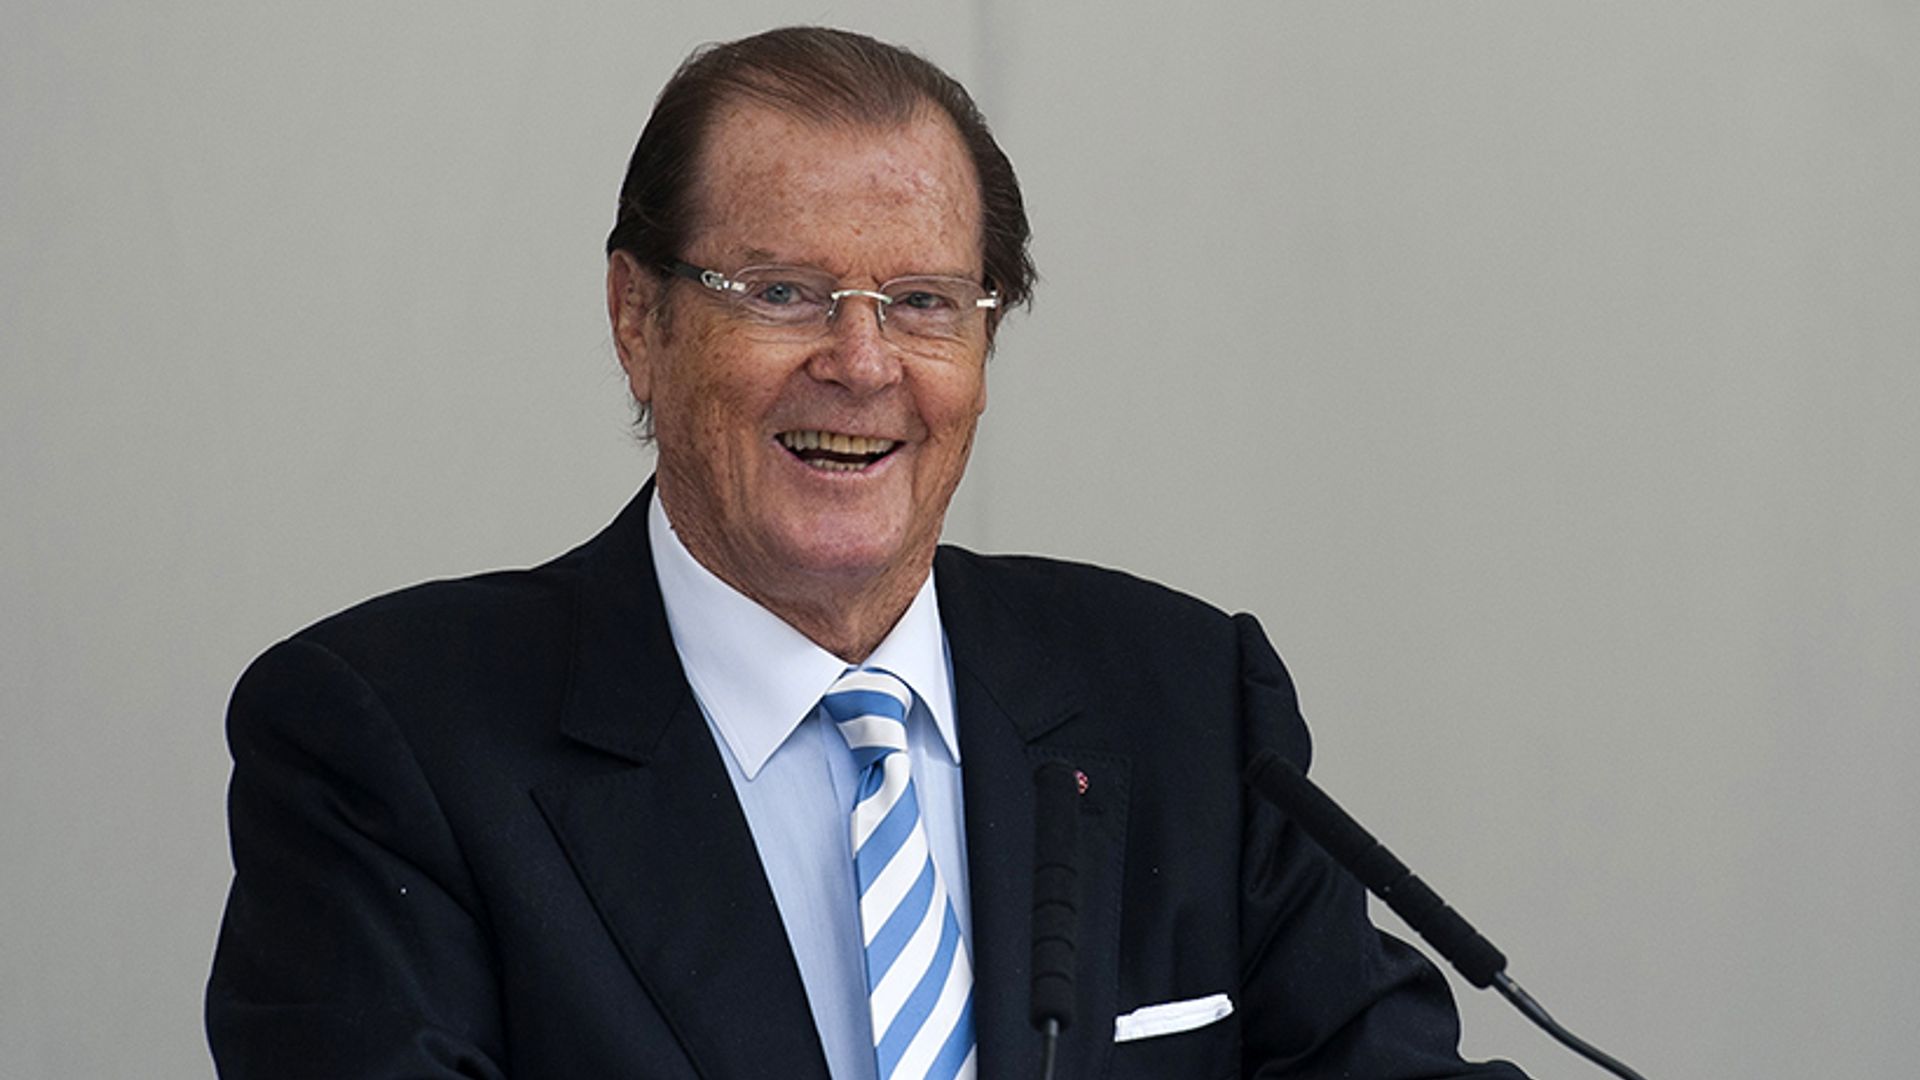 Sir Roger Moore laid to rest in 'beautiful' funeral service